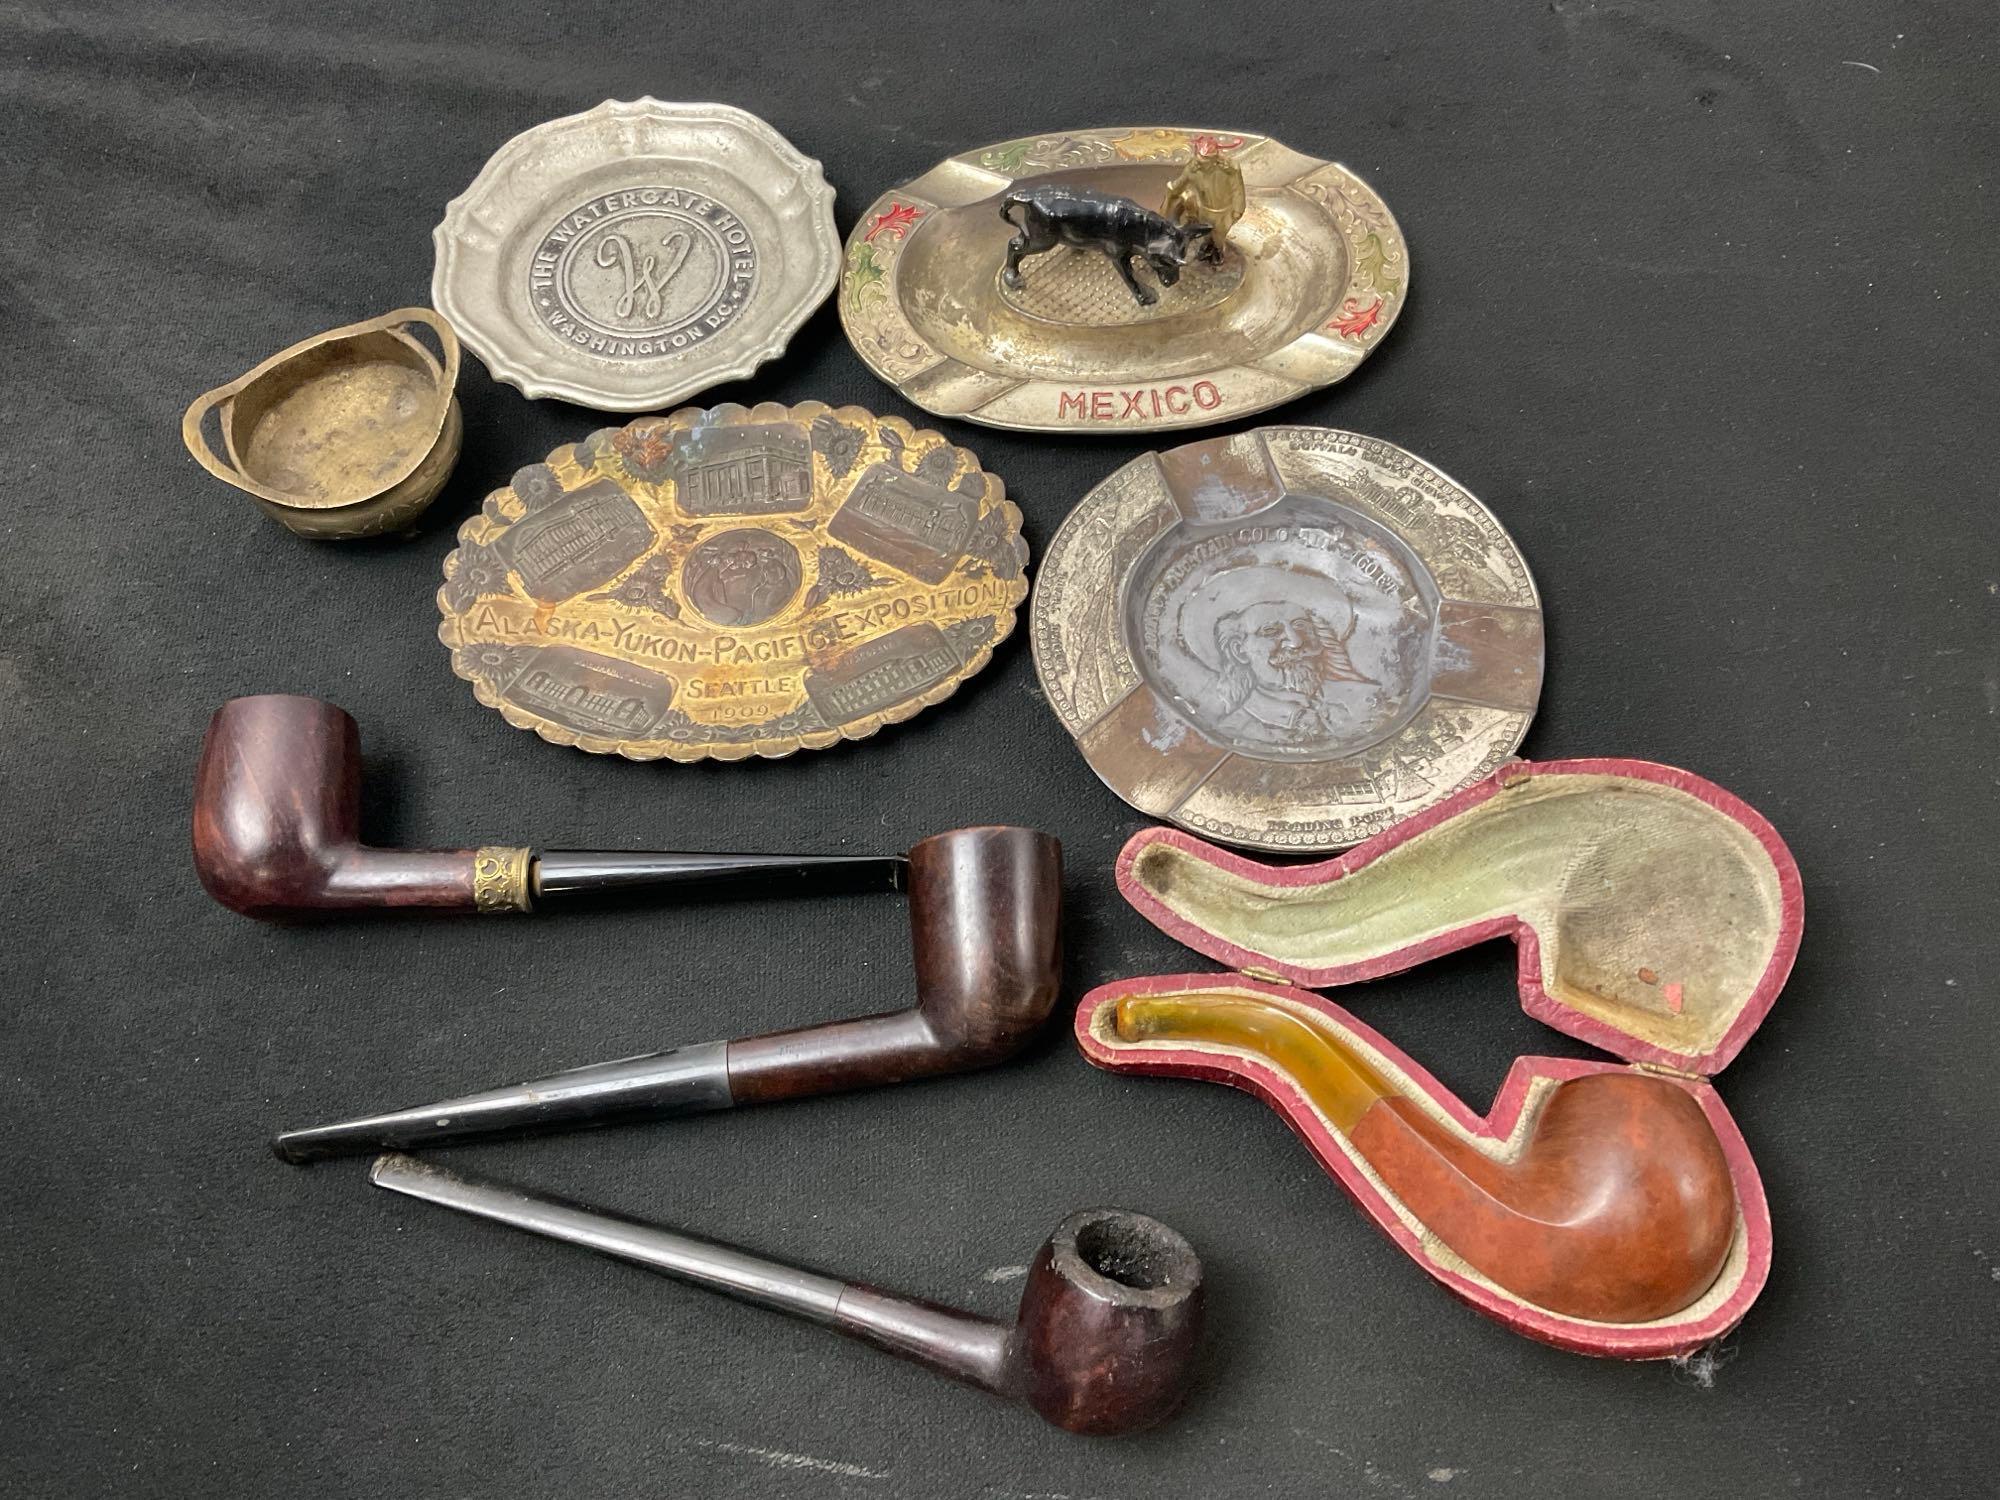 Collection of Ashtrays and Tobacco Pipes, incl from The Watergate Hotel, finely detailed engraving